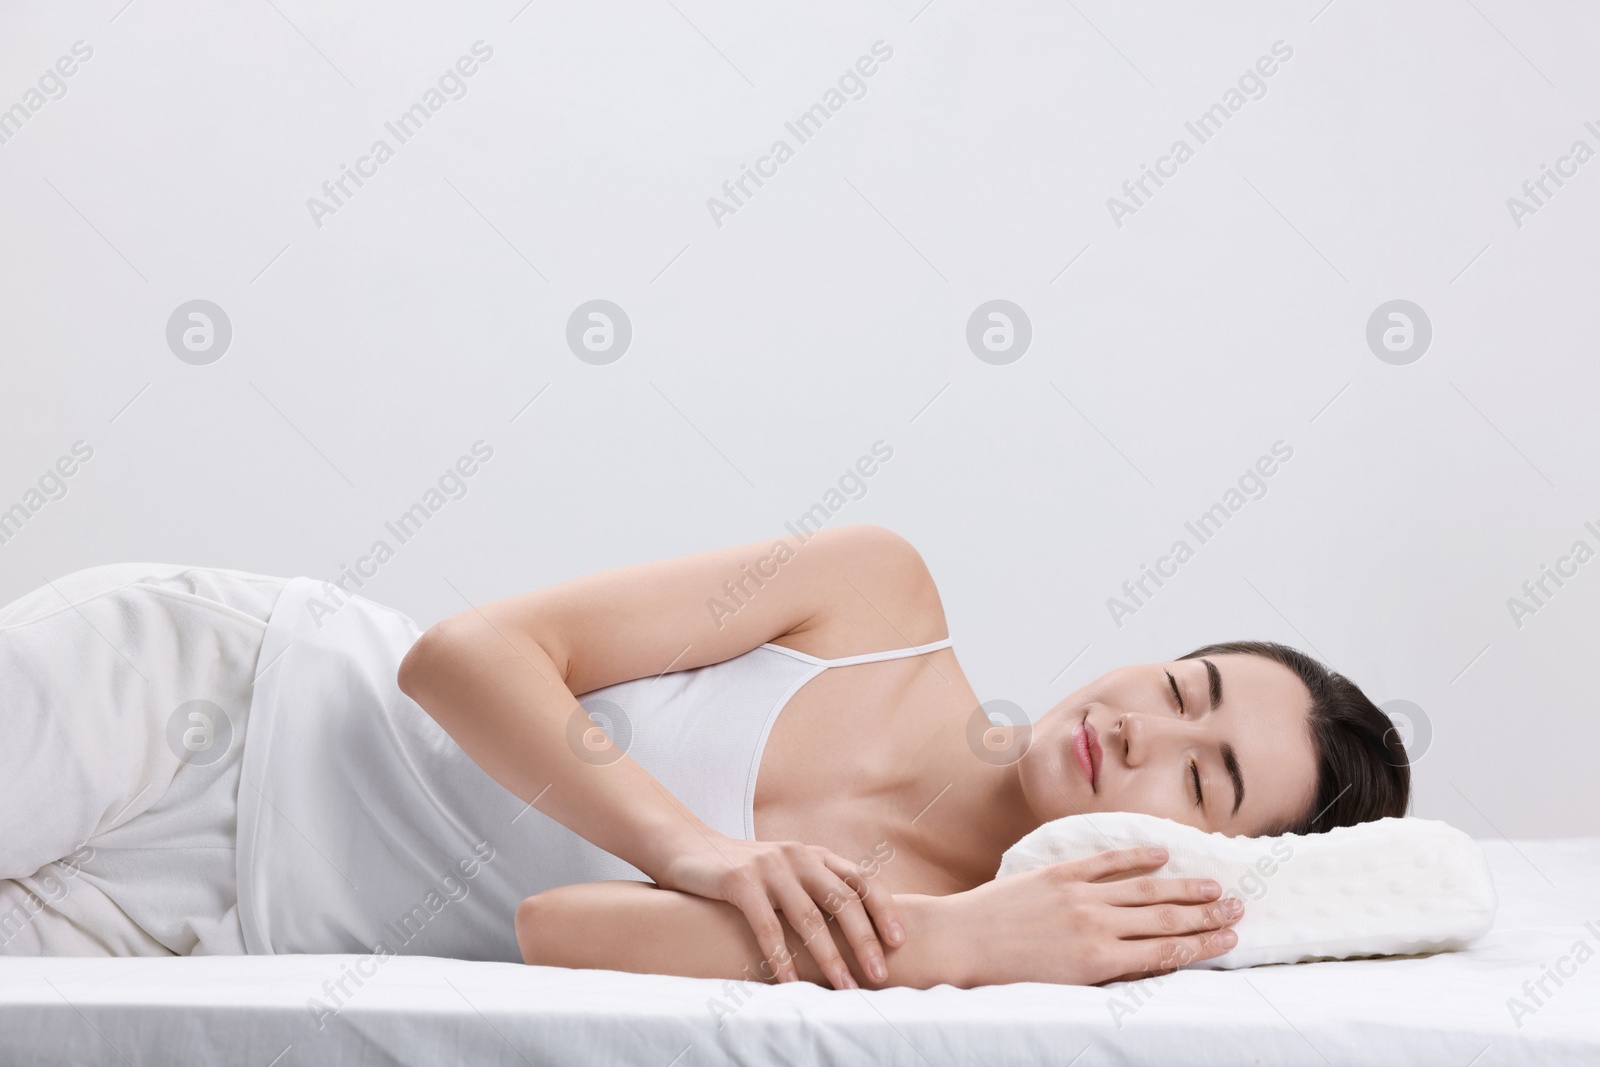 Photo of Woman sleeping on orthopedic pillow against light grey background, space for text